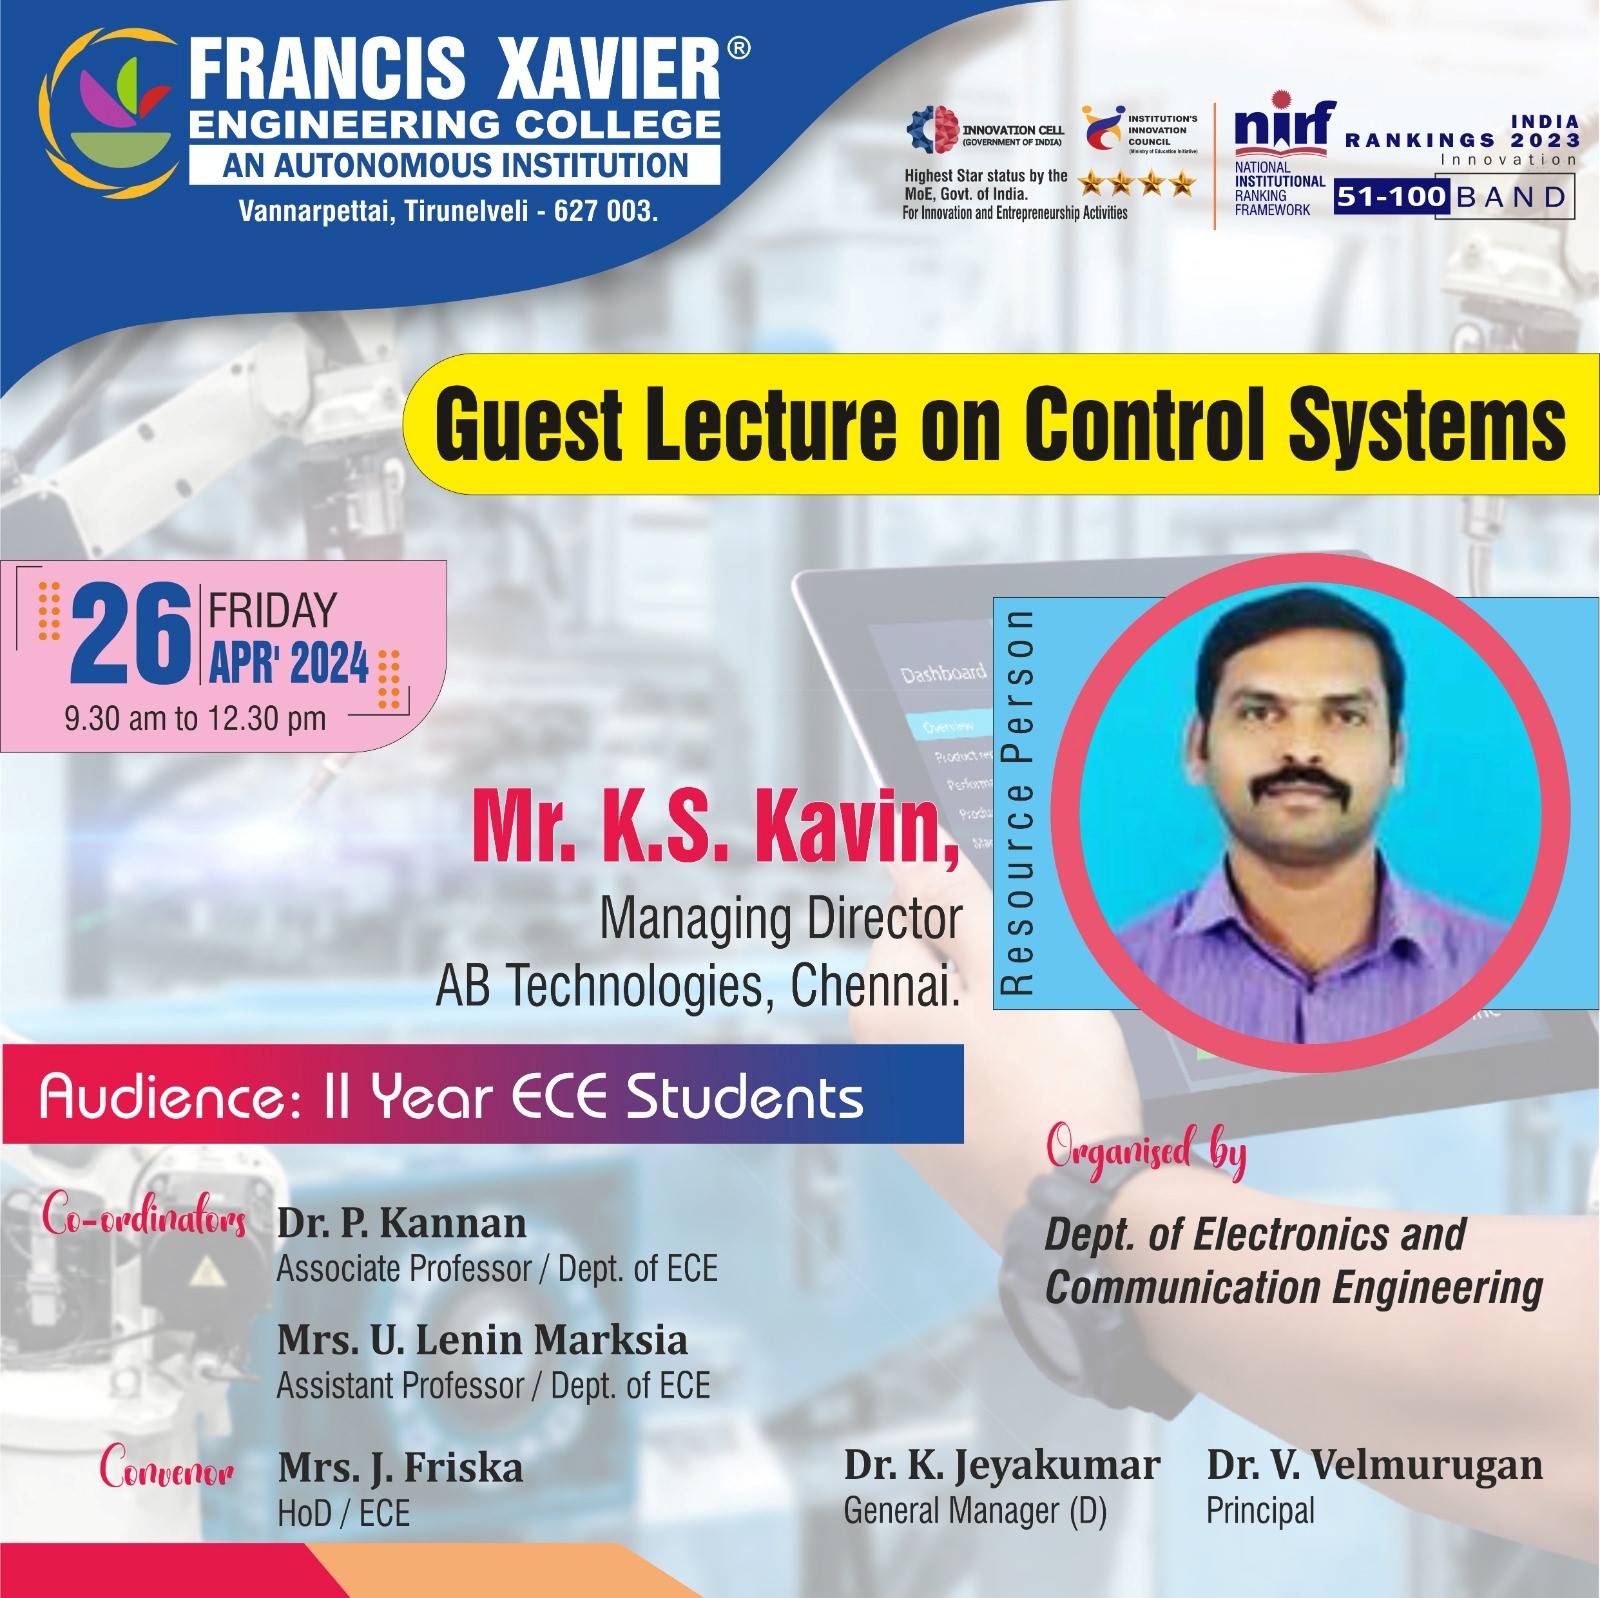 Guest Lecture on Control Systems